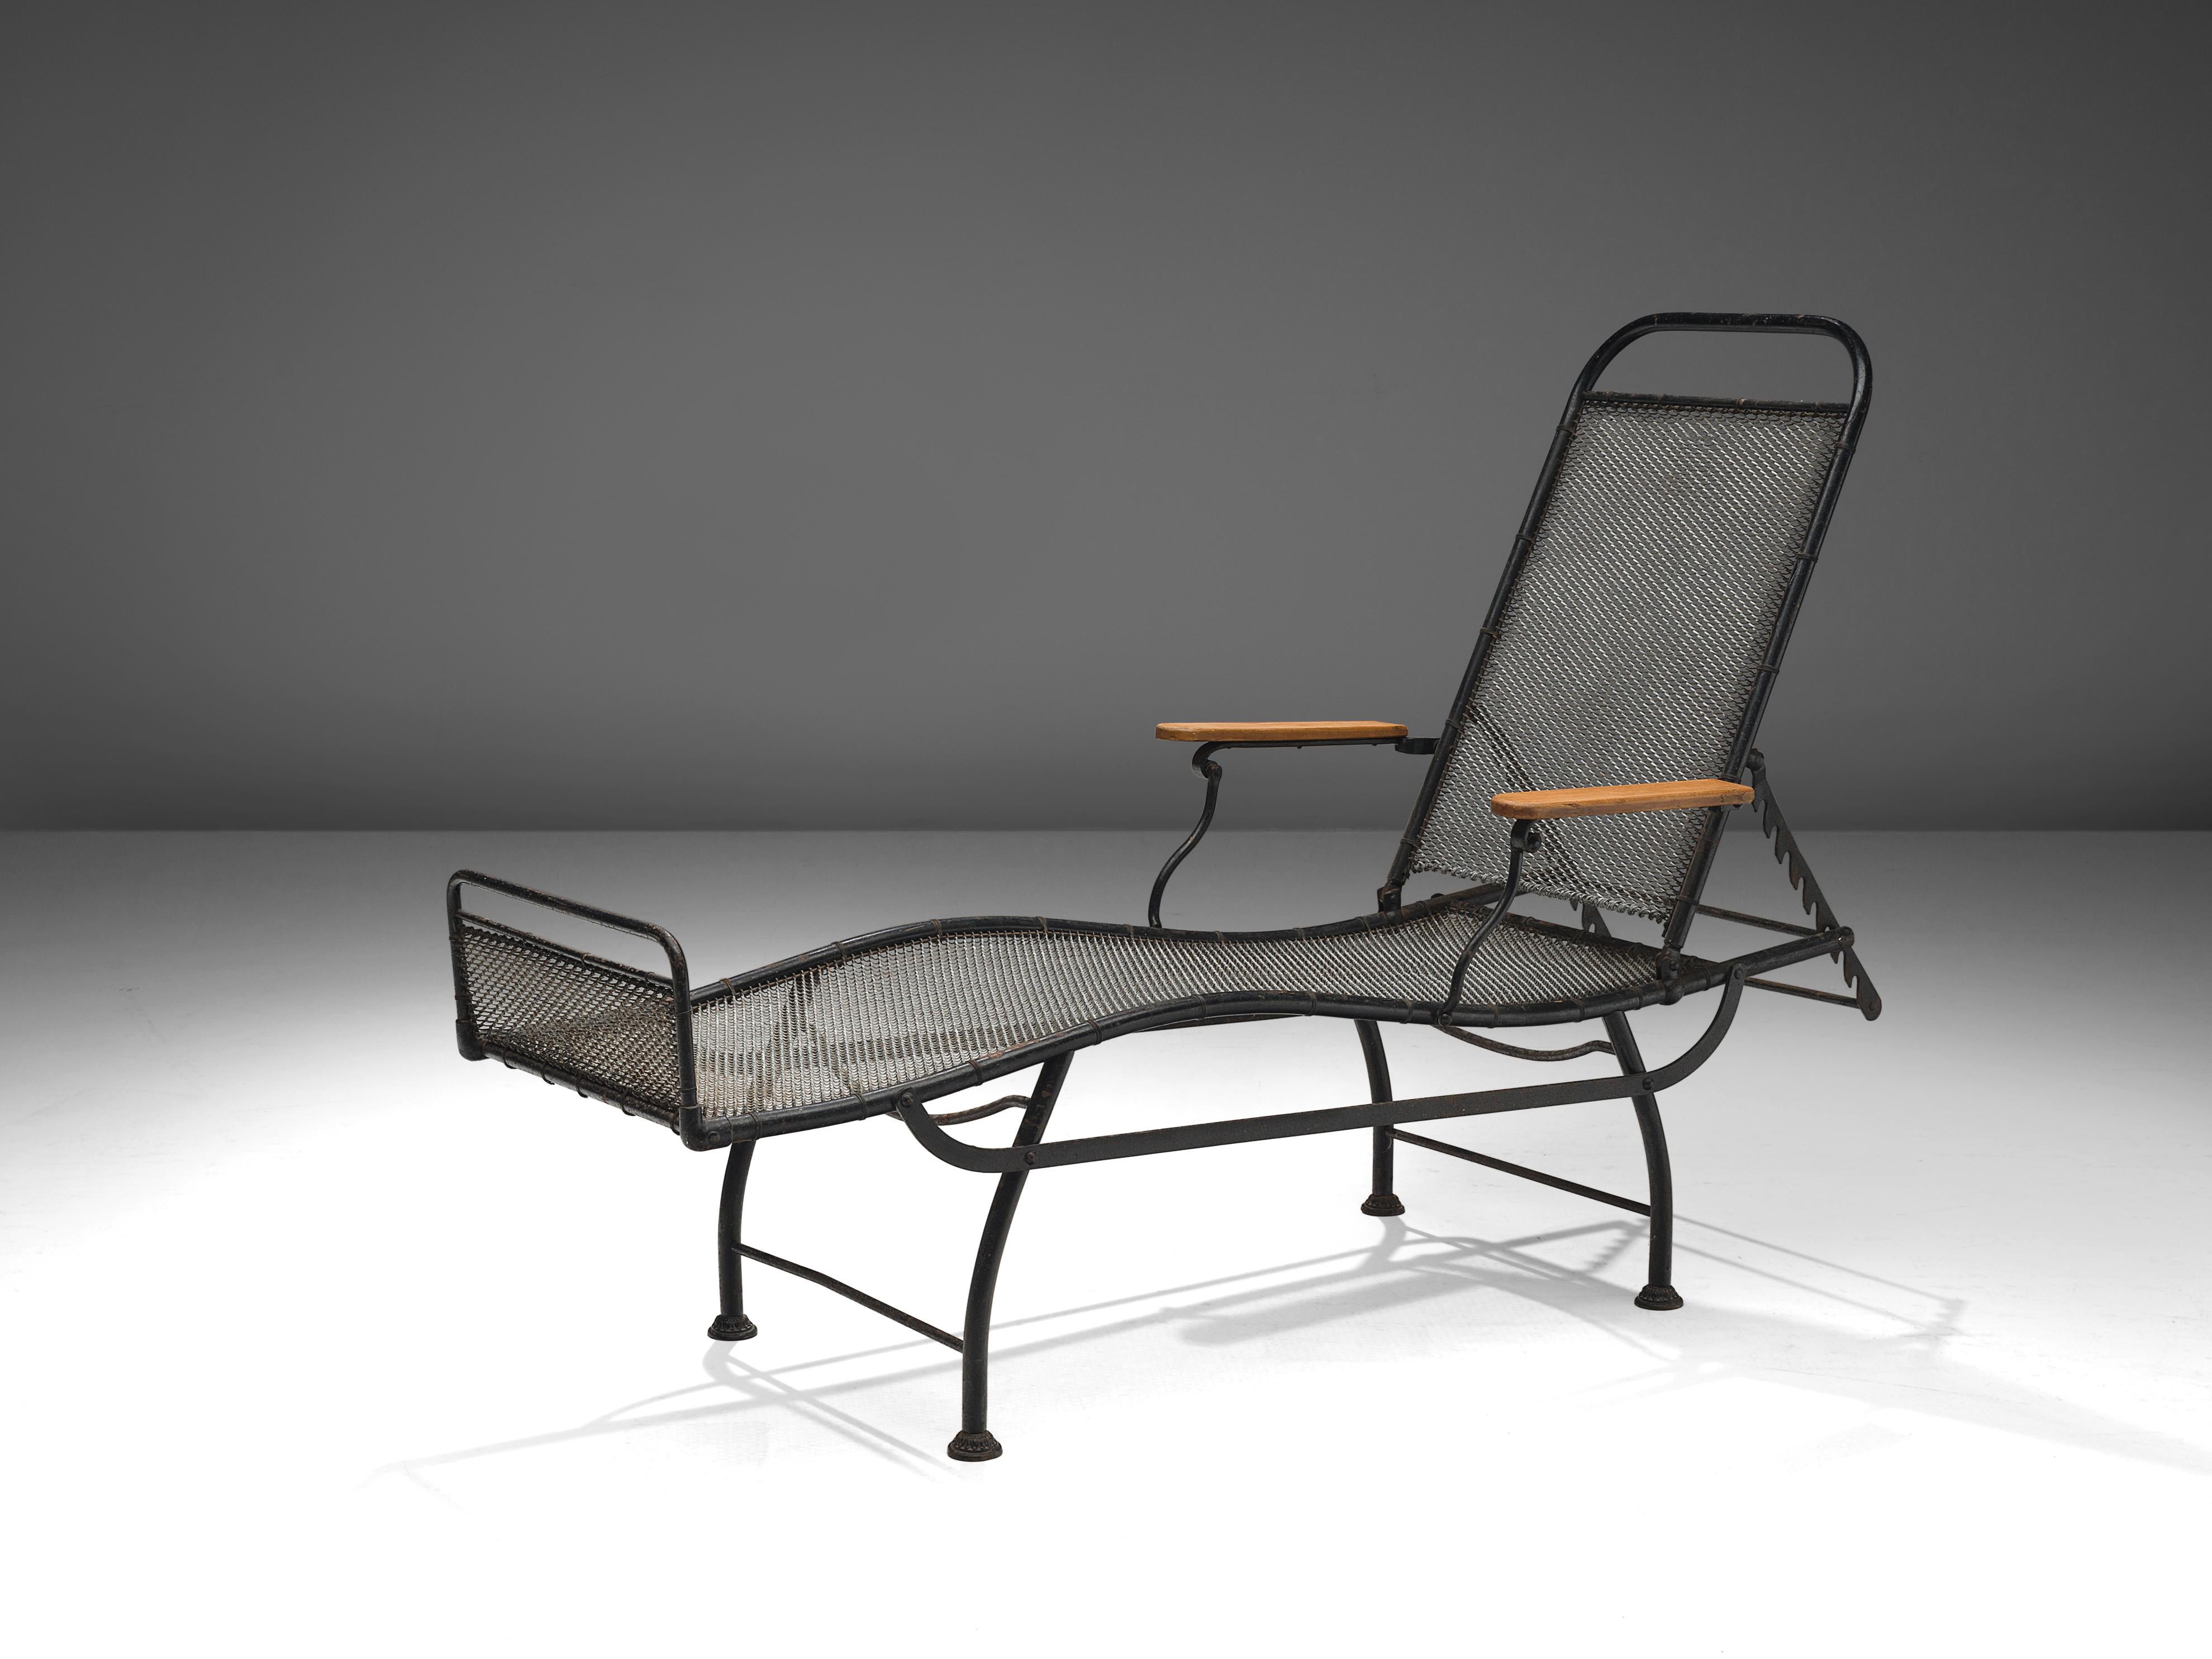 Chaise longue, metal, wood, France, 1930s

This functional, adjustable daybed features a frame in black metal and a seat of spiral metal webbing. The backrest is adjustable in different angles and allows the user to switch from an upright position